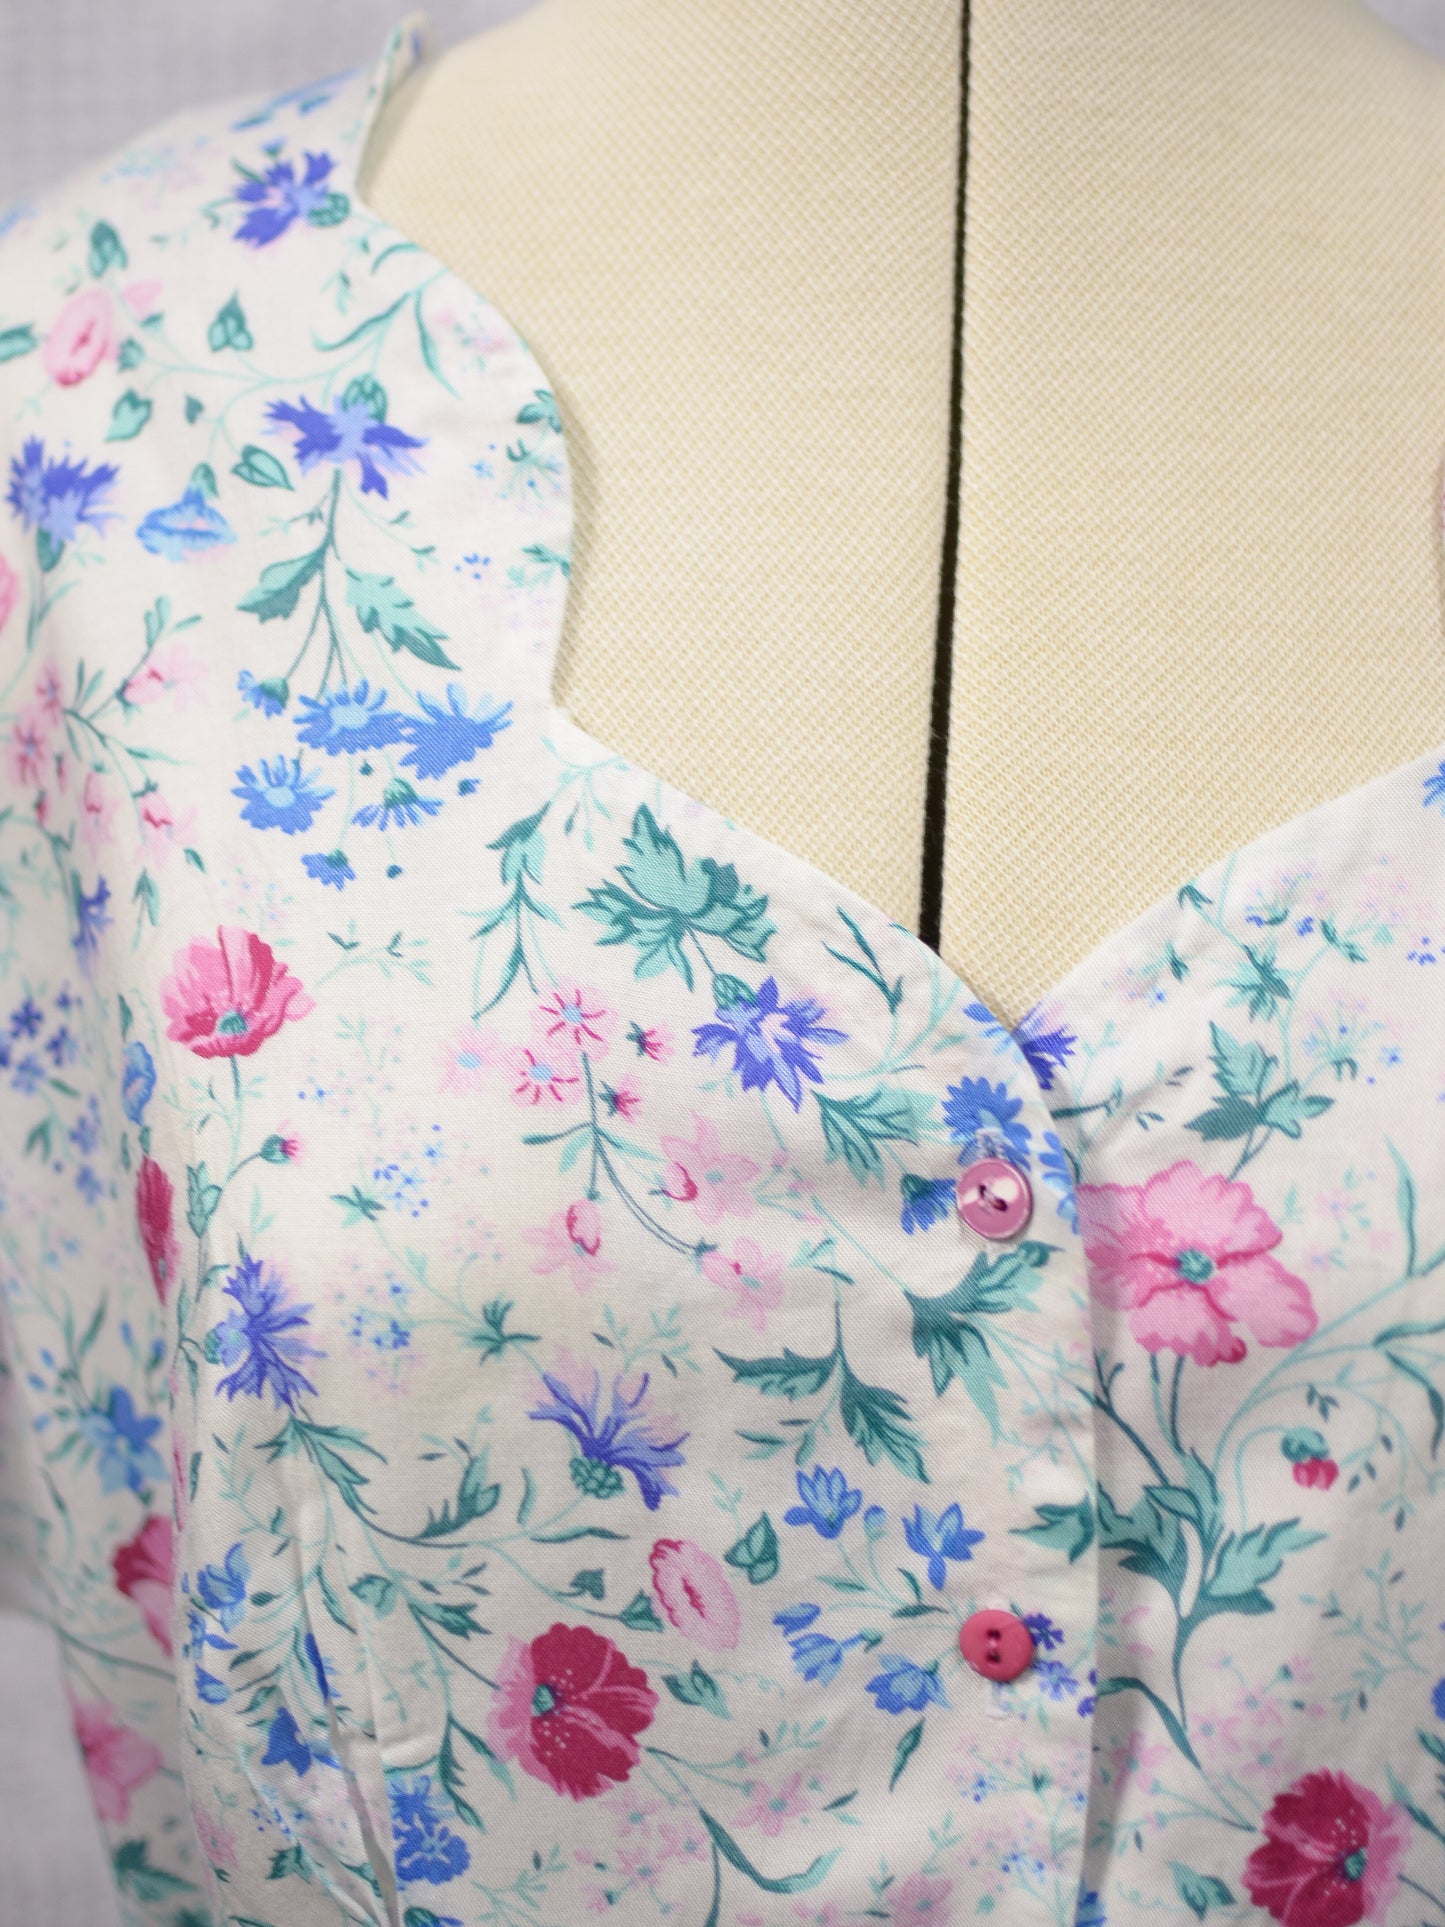 1980s Etam white and pink floral cropped scallop neckline blouse